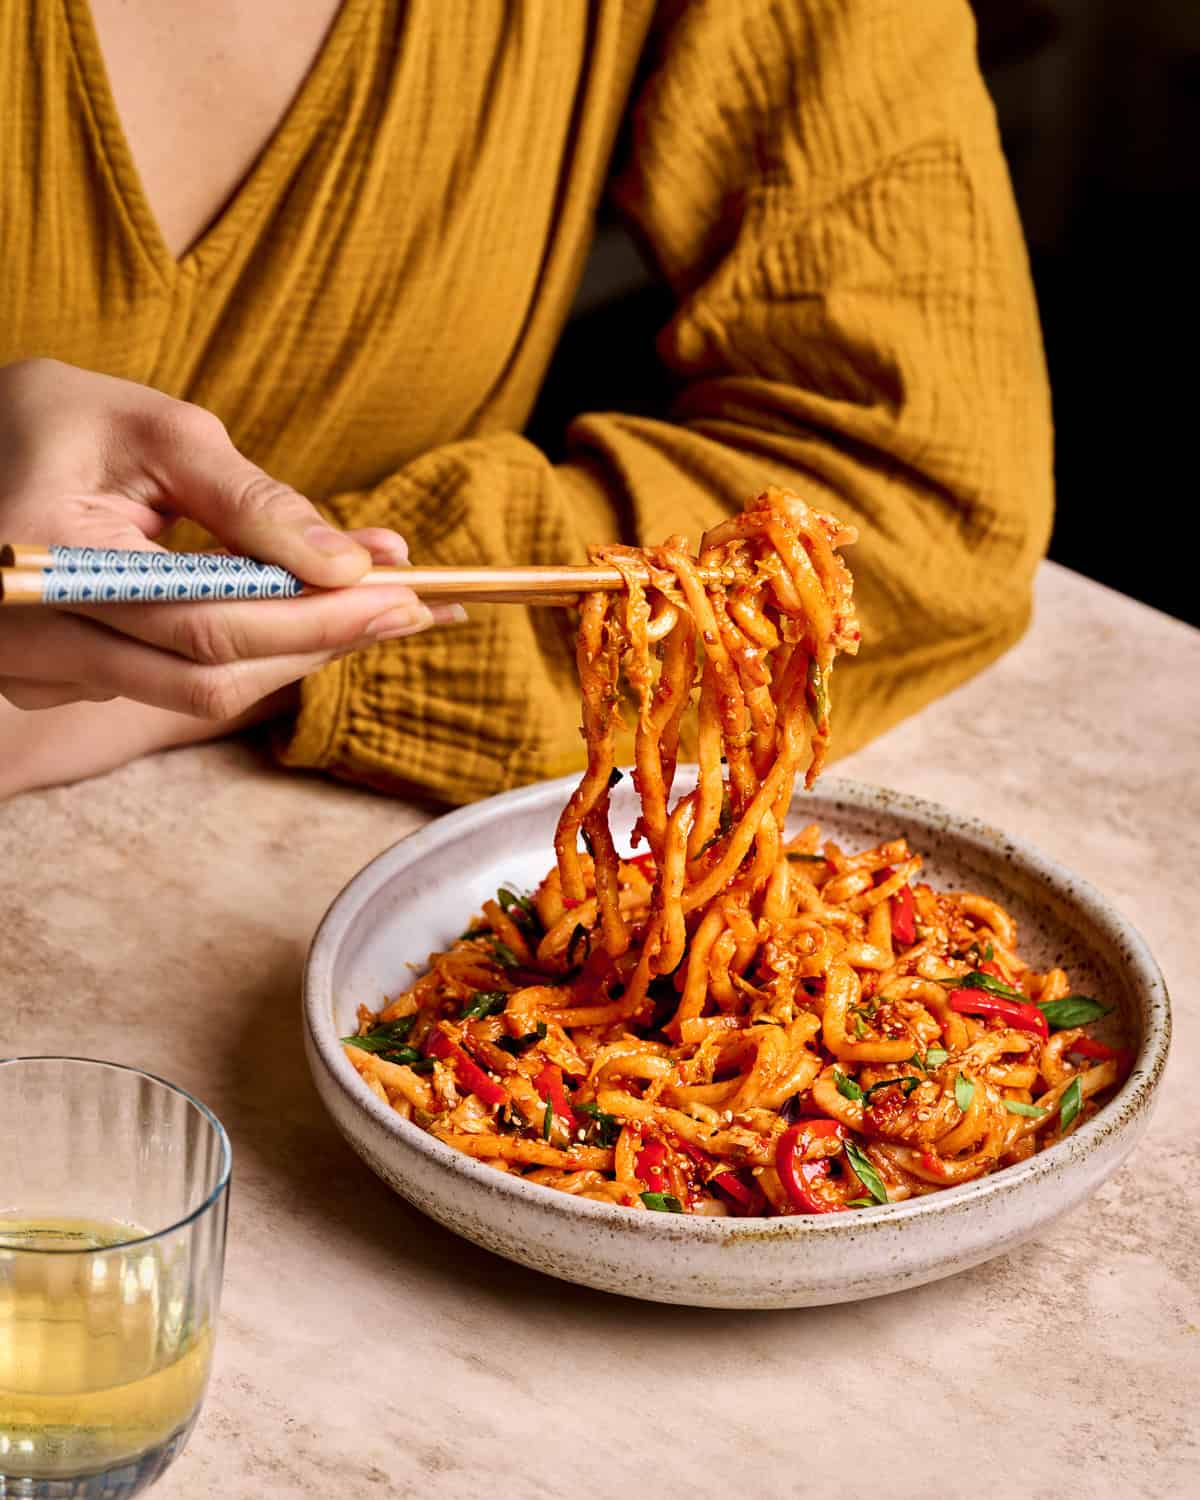 Woman sitting at a table eating gochujang noodles from a bowl with chopsticks.